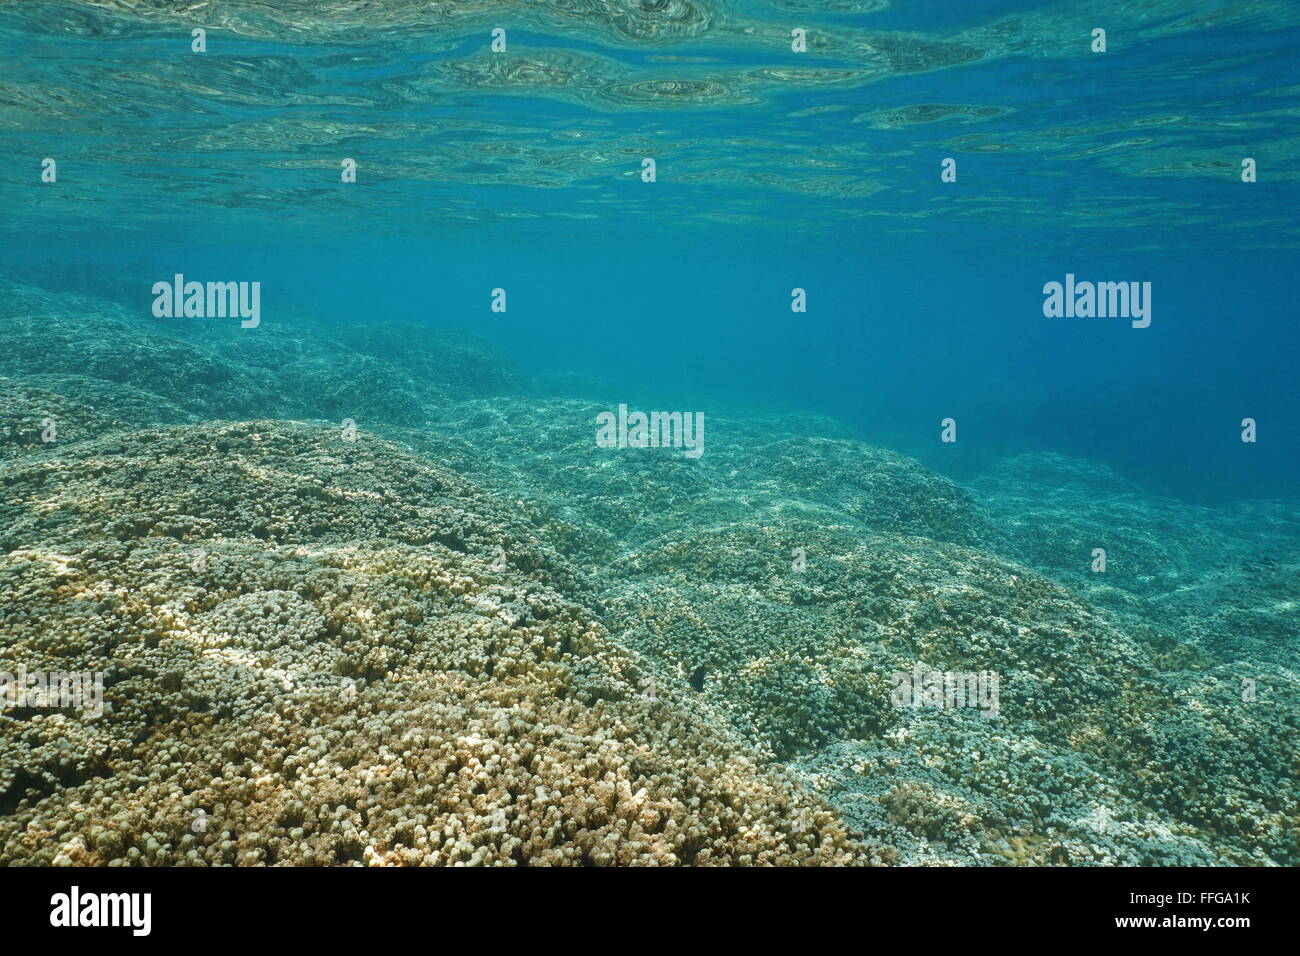 Underwater landscape, shallow ocean floor covered by large colonies of finger coral, lagoon of Huahine, Pacific ocean, French Po Stock Photo